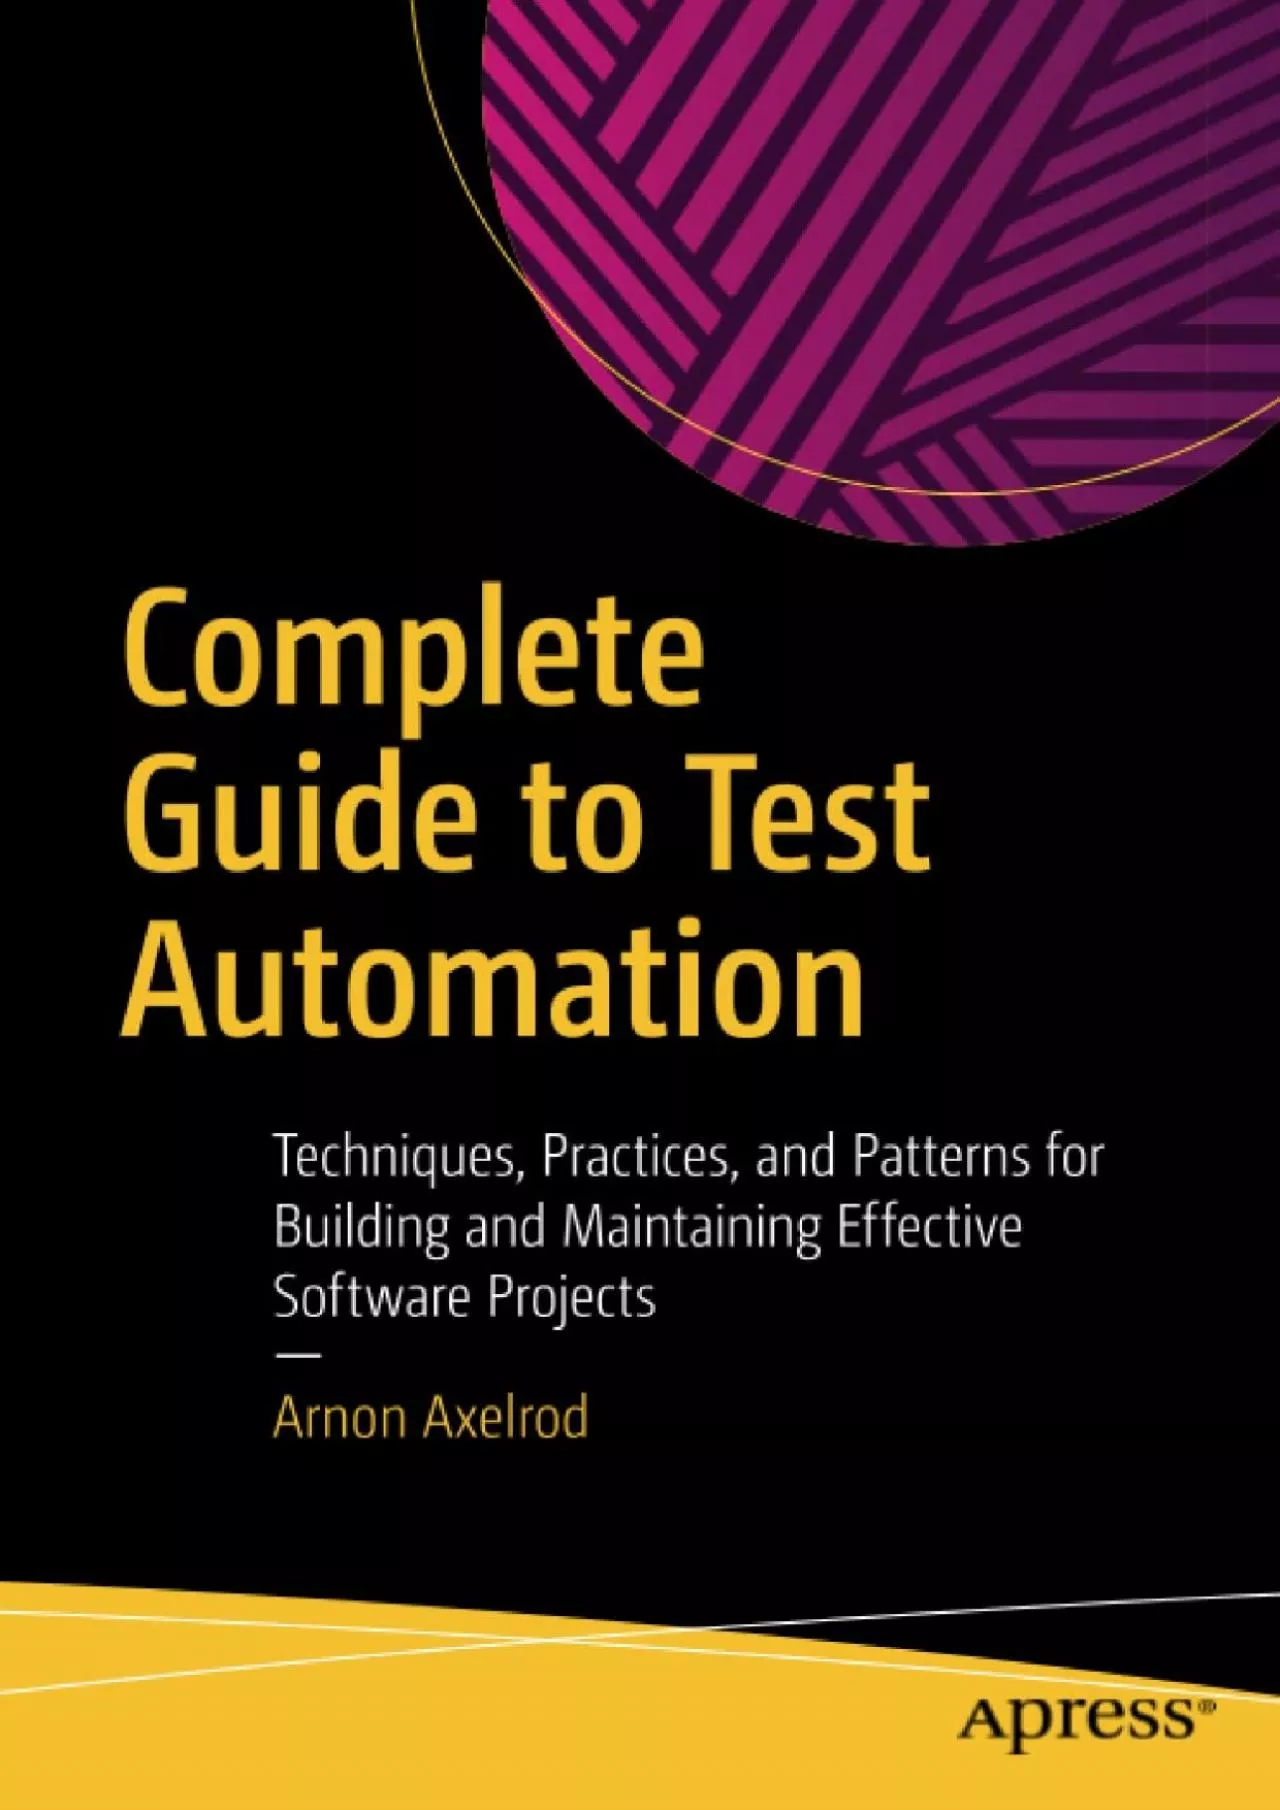 [eBOOK]-Complete Guide to Test Automation: Techniques, Practices, and Patterns for Building